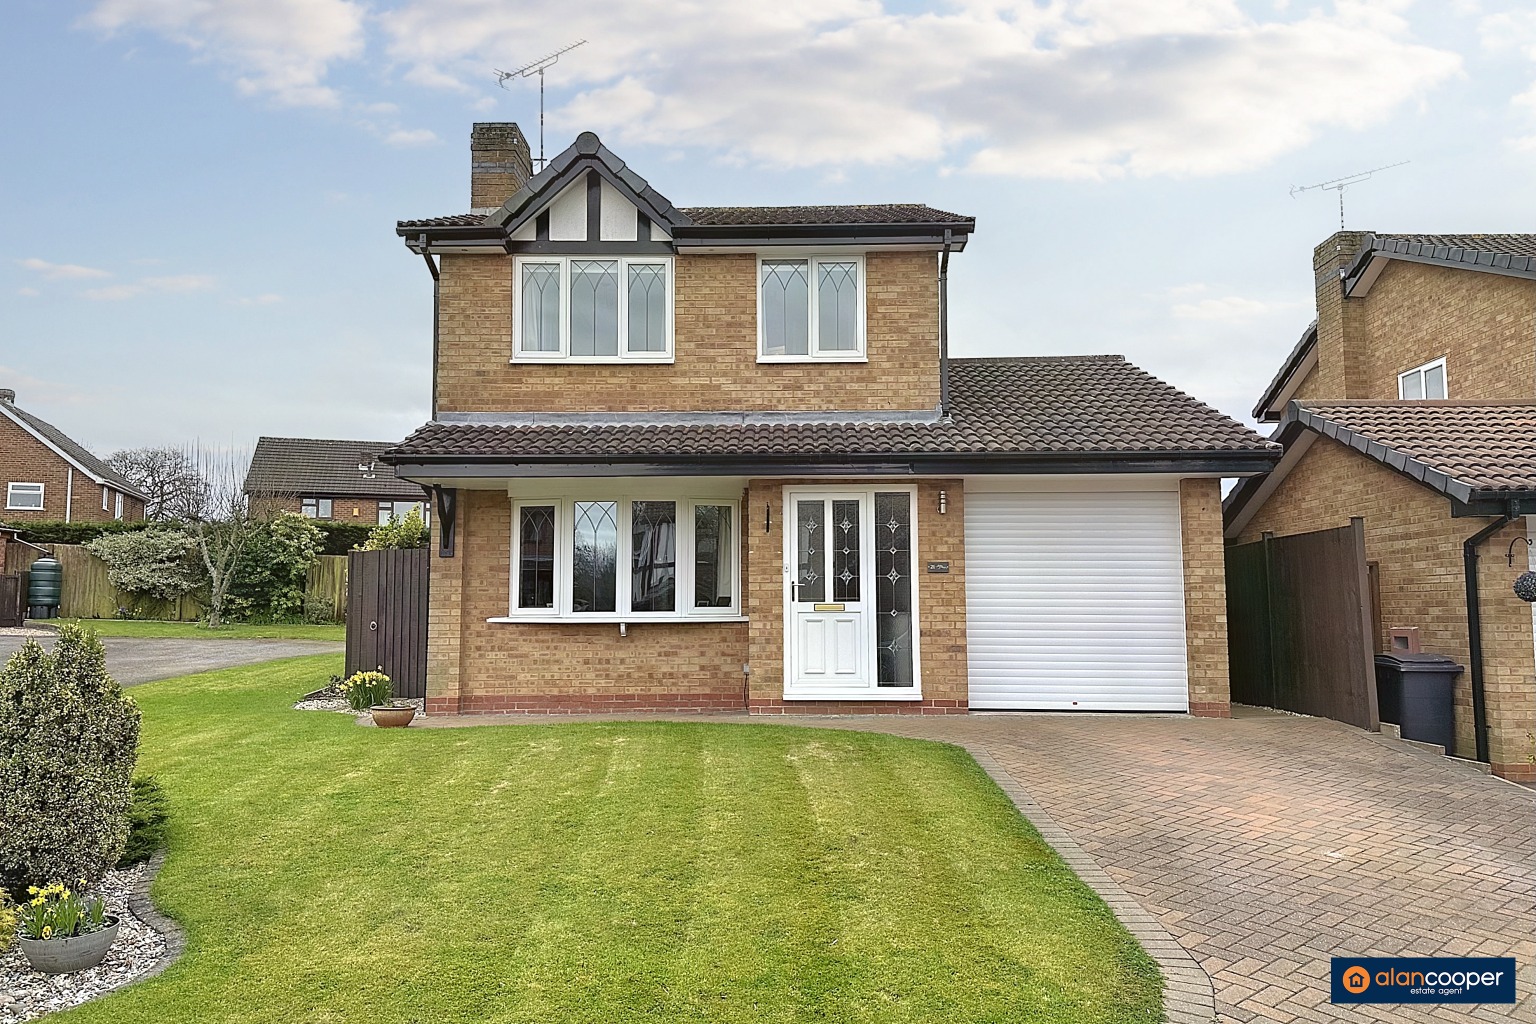 Fourfields Way, Arley, Coventry, CV7 8PX